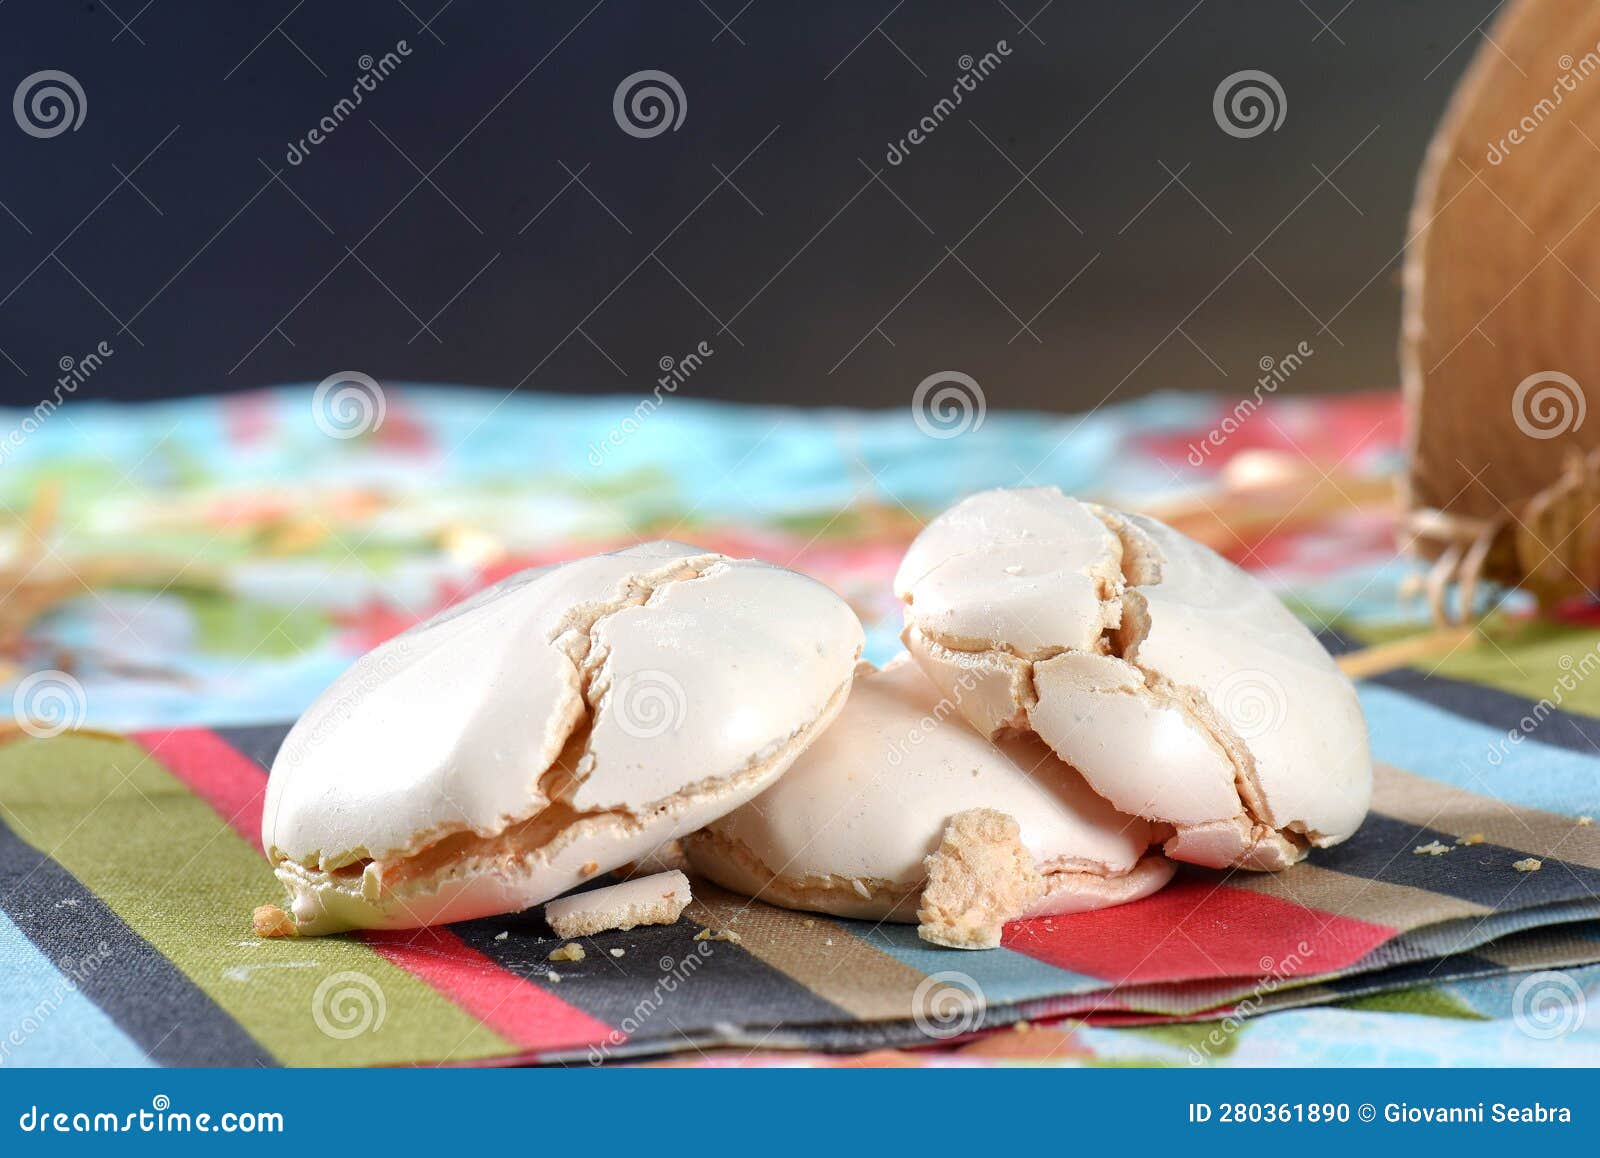 homemade cookies, sighs, also called merengue, brazilian and french cuisine, sigh candy